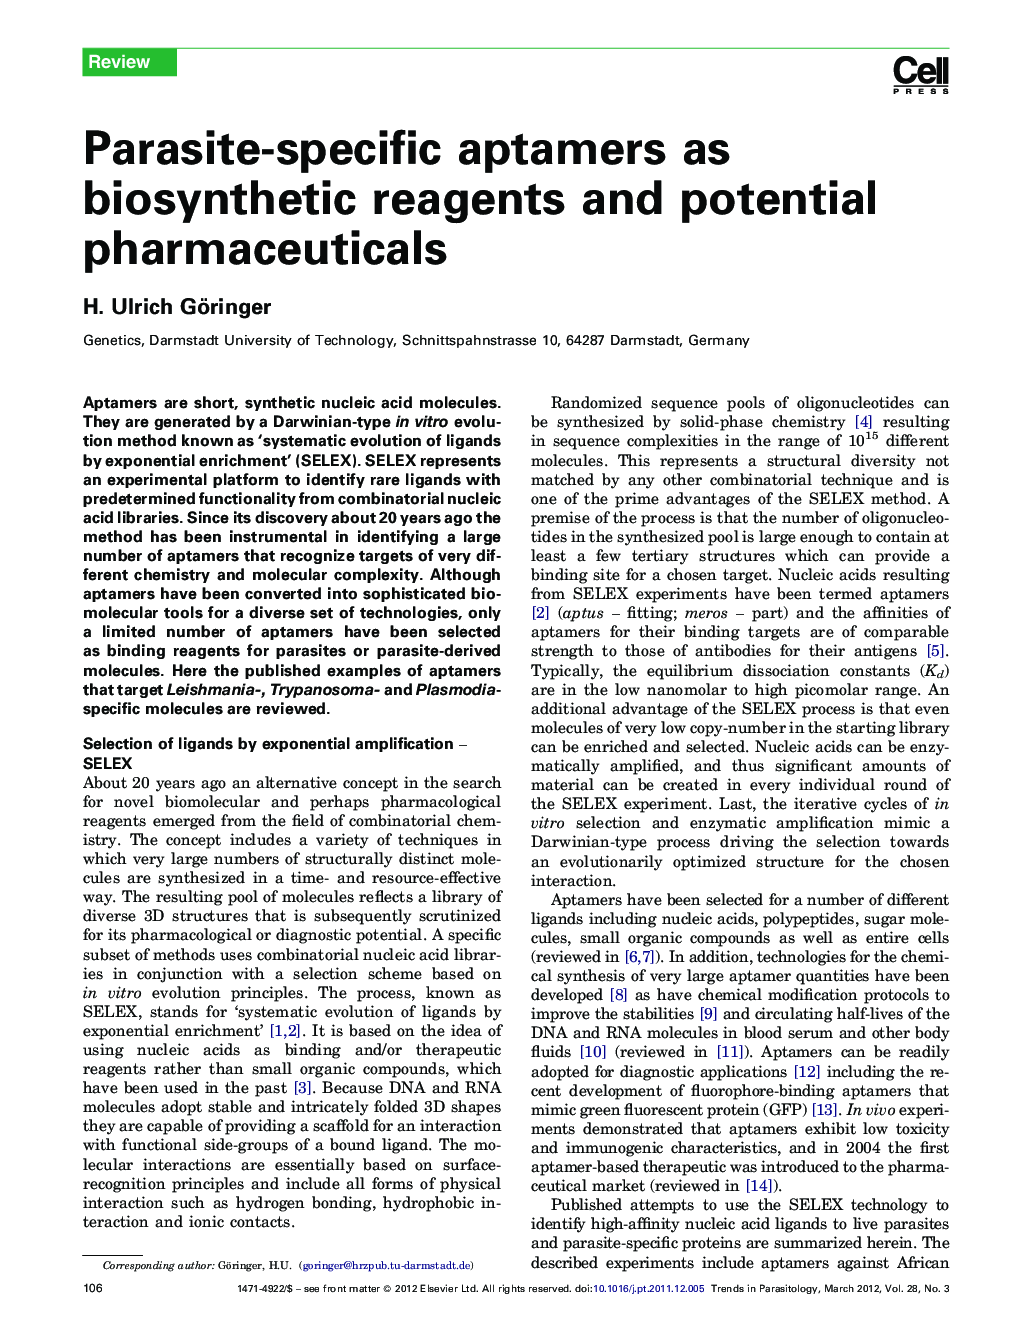 Parasite-specific aptamers as biosynthetic reagents and potential pharmaceuticals